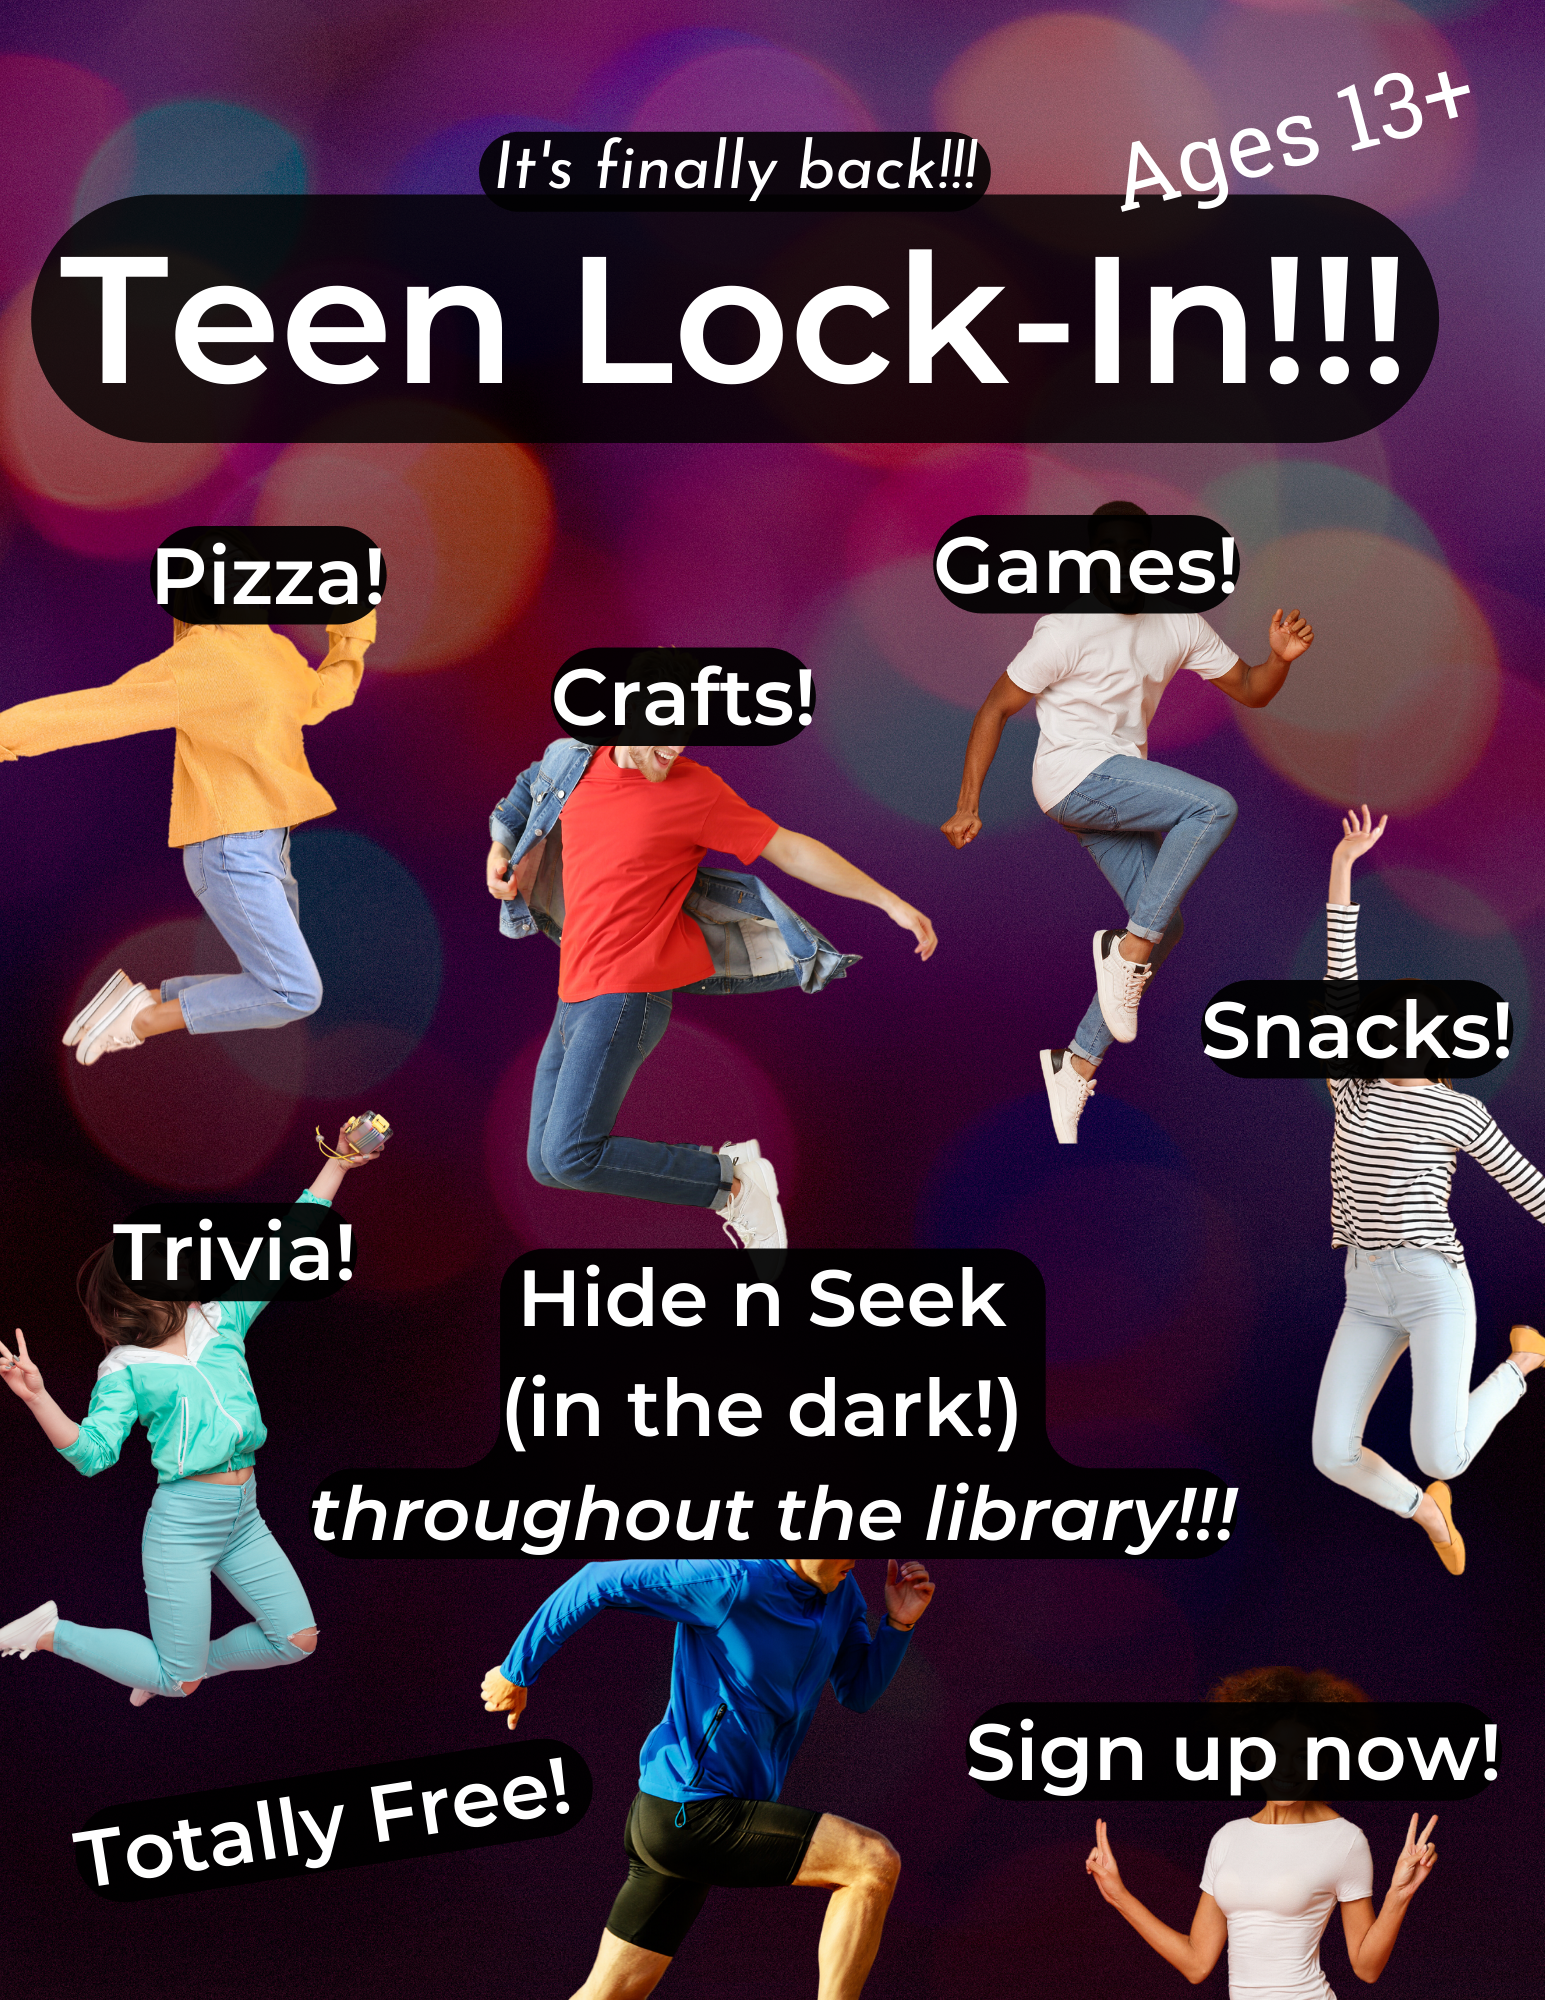 Text reads "It's finally back= Teen Lock-in!!! 13+ Pizza! Games! Crafts! Trivia" Snacks! Hide and Seek (in the dark! throughout the whole library! Totally free! Sign up now!" over a background of diffuse lights. Each list item has a photo of a person jumping behind it